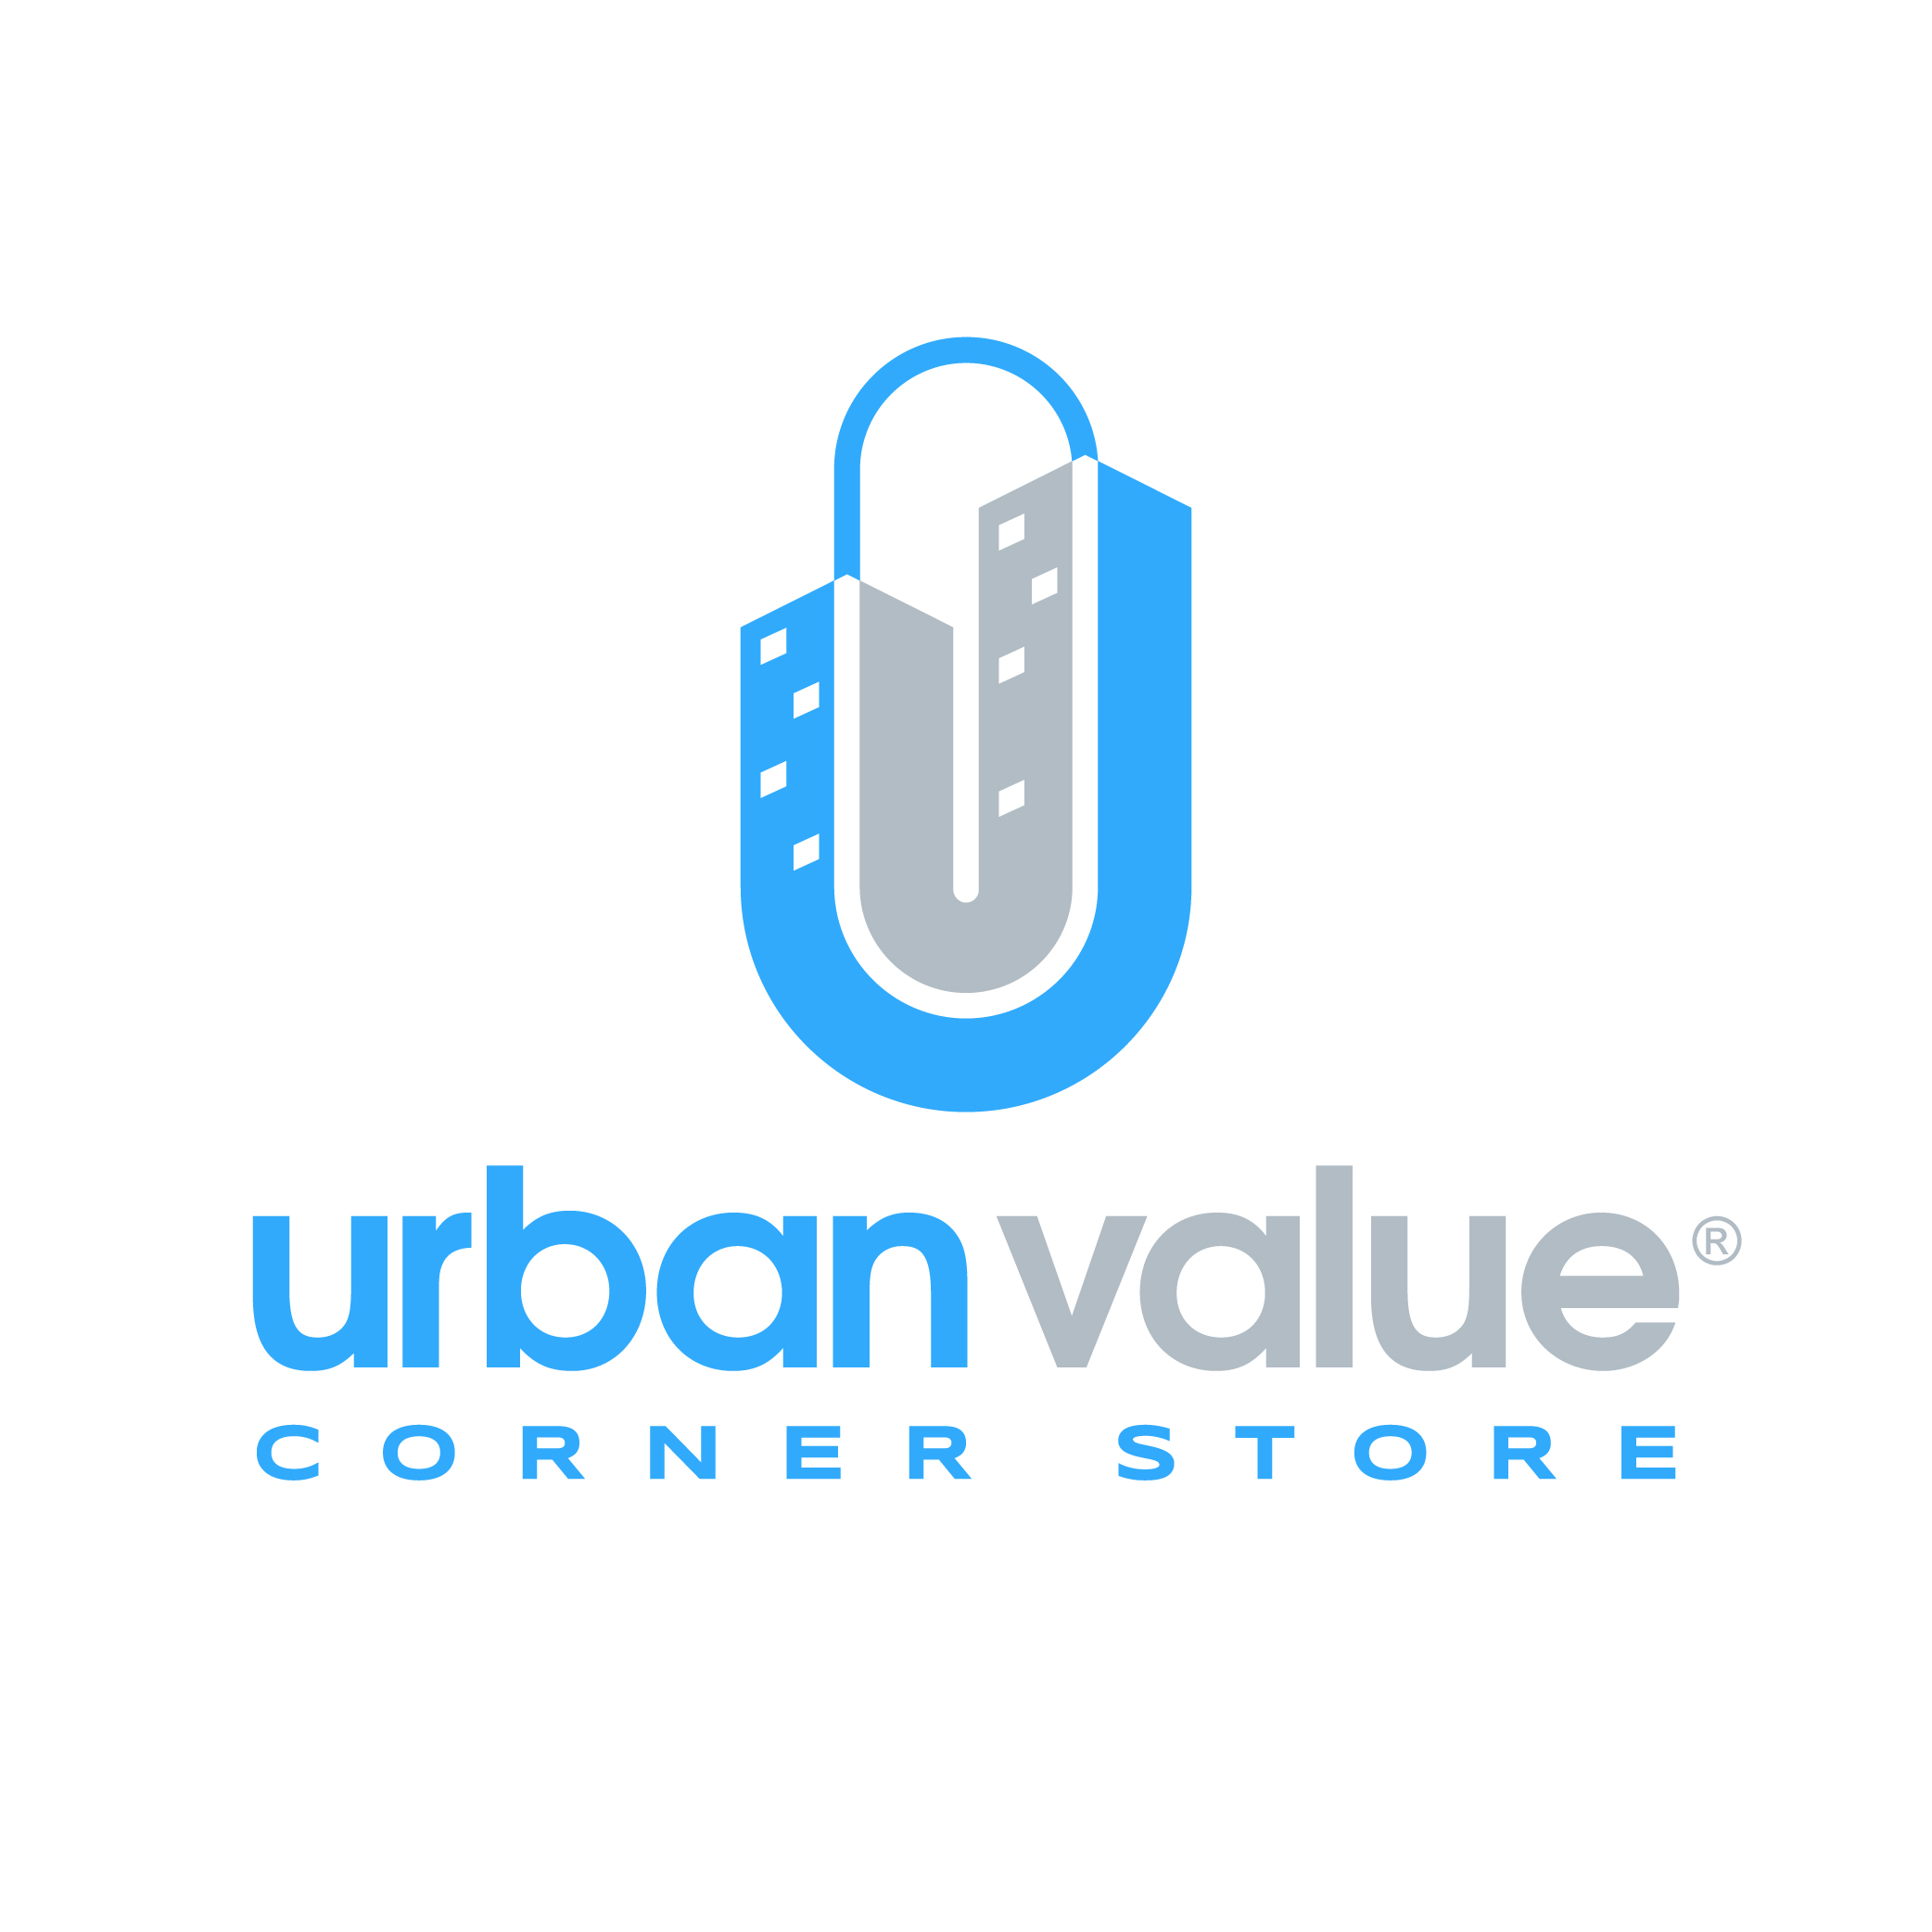 McKinney’s Urban Value Store Selects Core-Mark as Primary Vendor